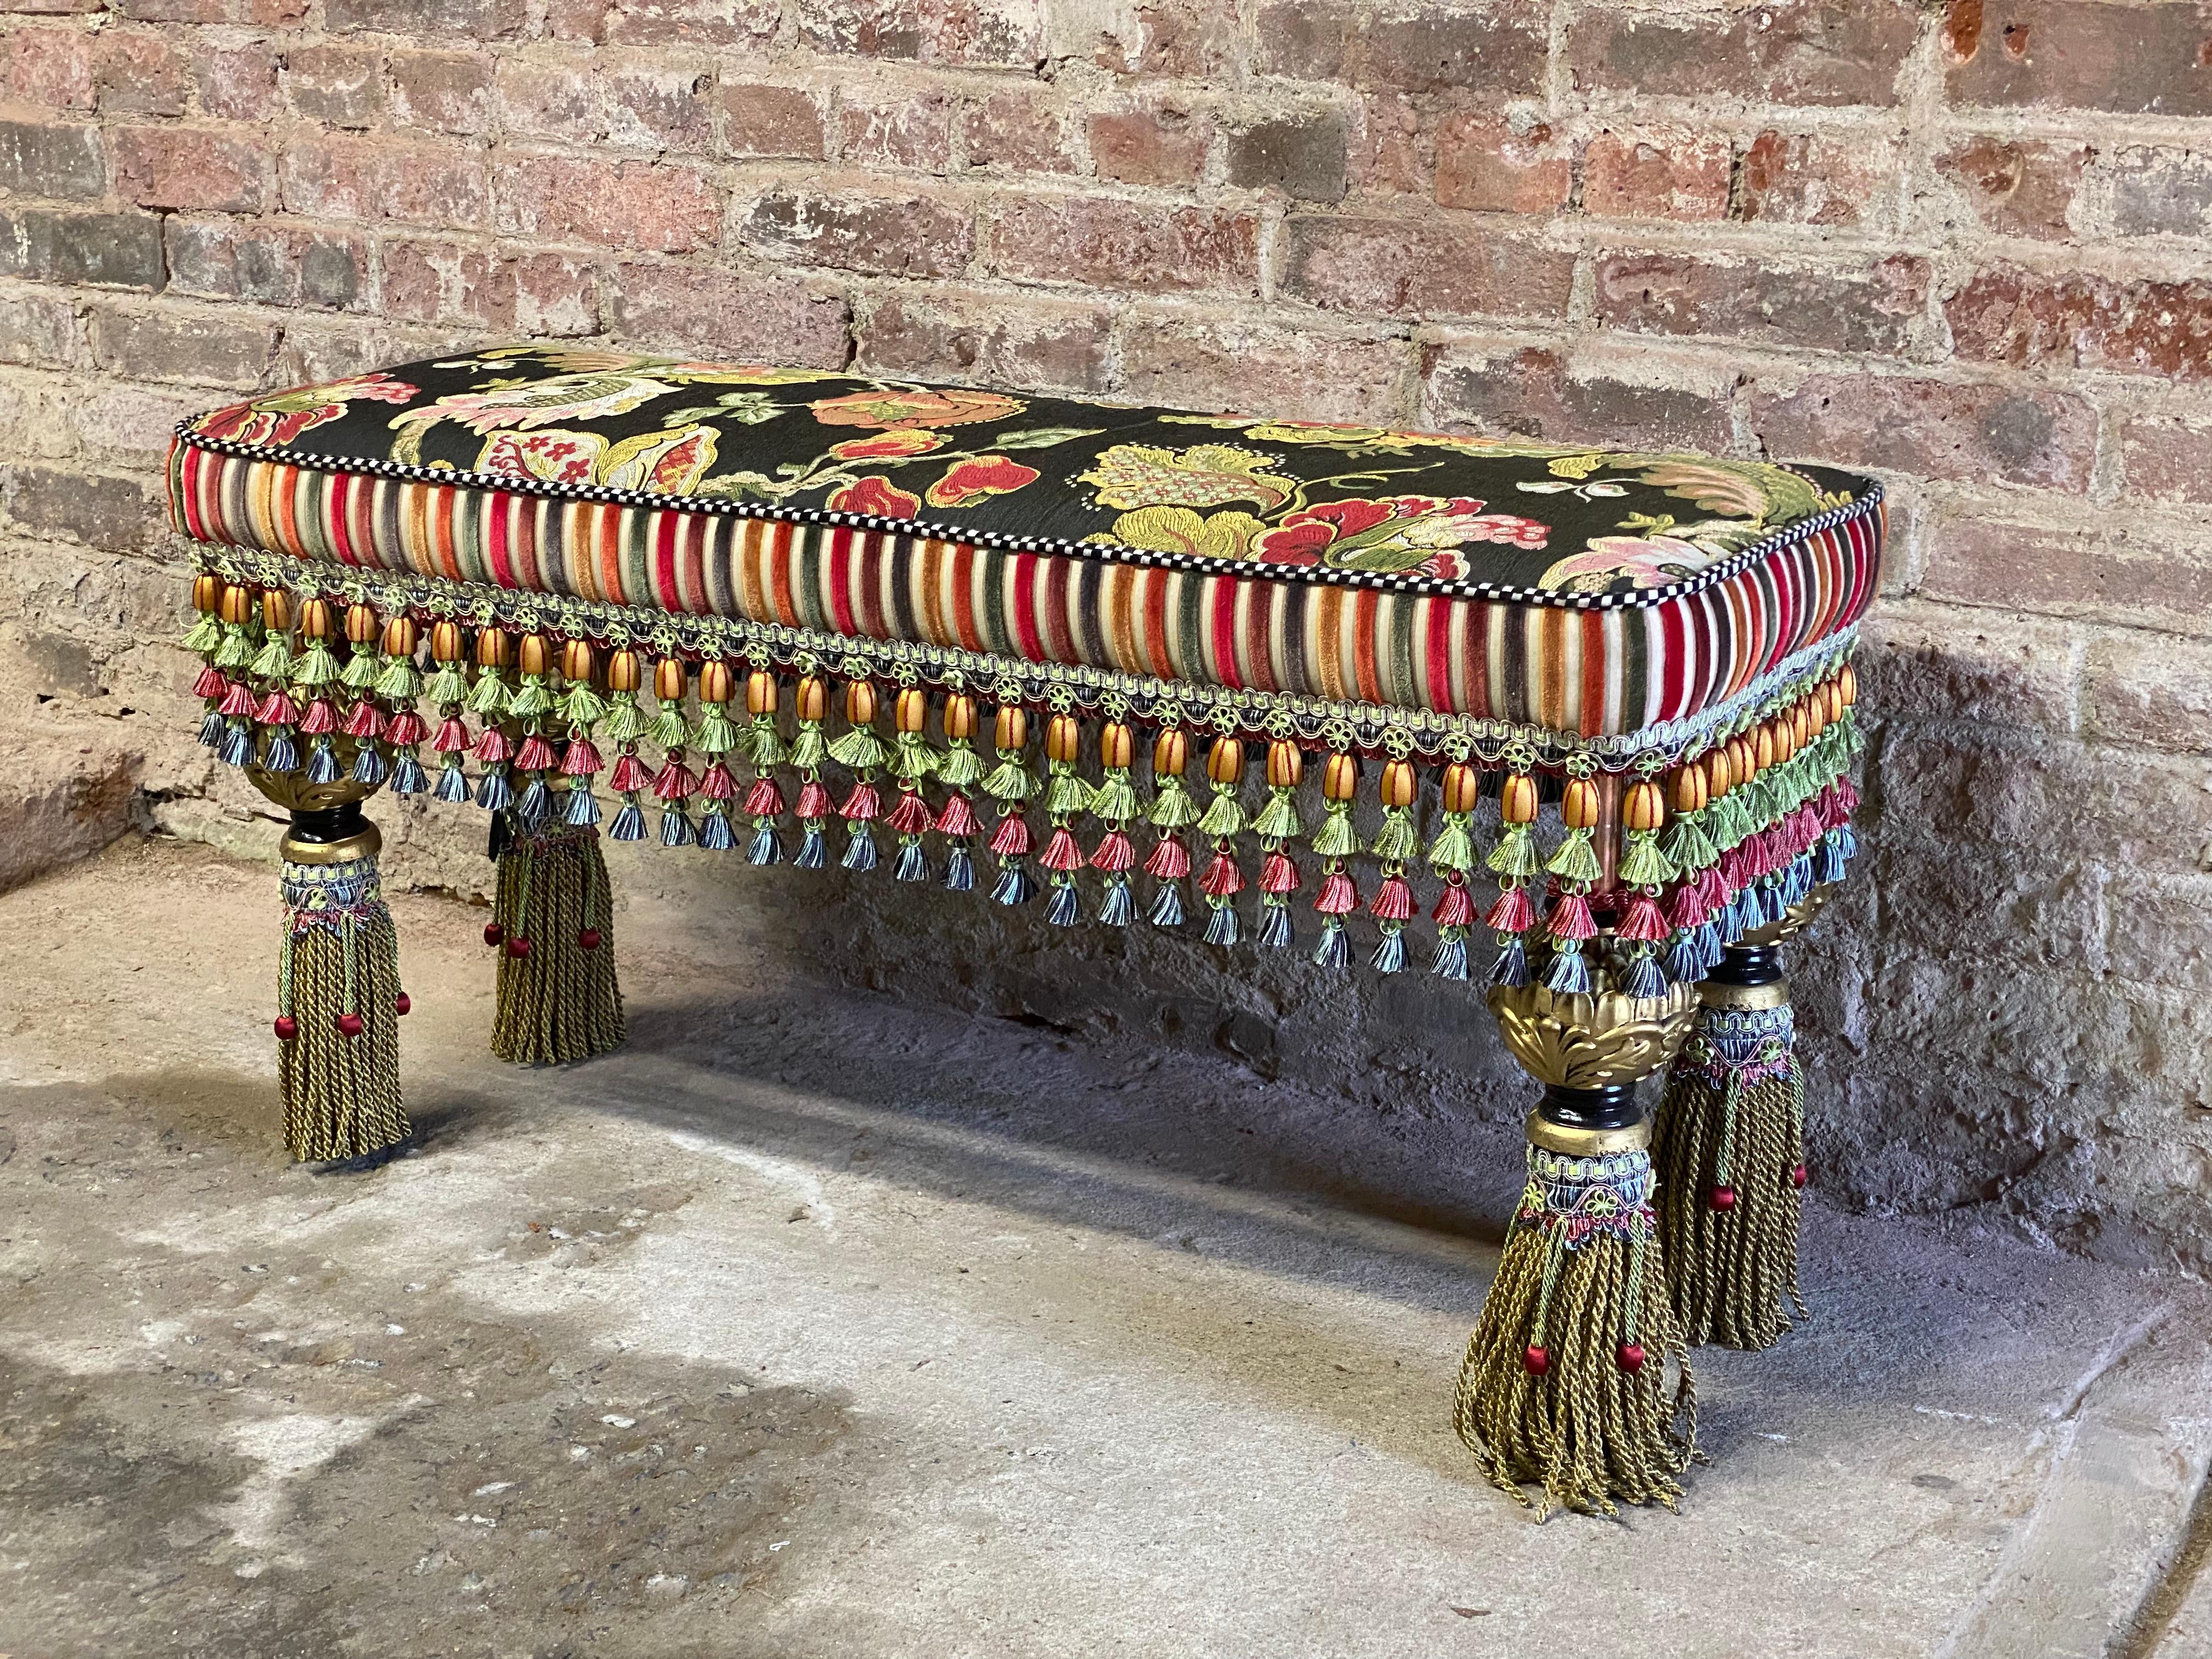 Signed Mackenzie Childs upholstered bench. Fantastically bizarre and whimsical piece that could go anywhere in the home or office. The diverse use of pattern, texture, color and design make her pieces stand out. Circa 1990. Good clean overall